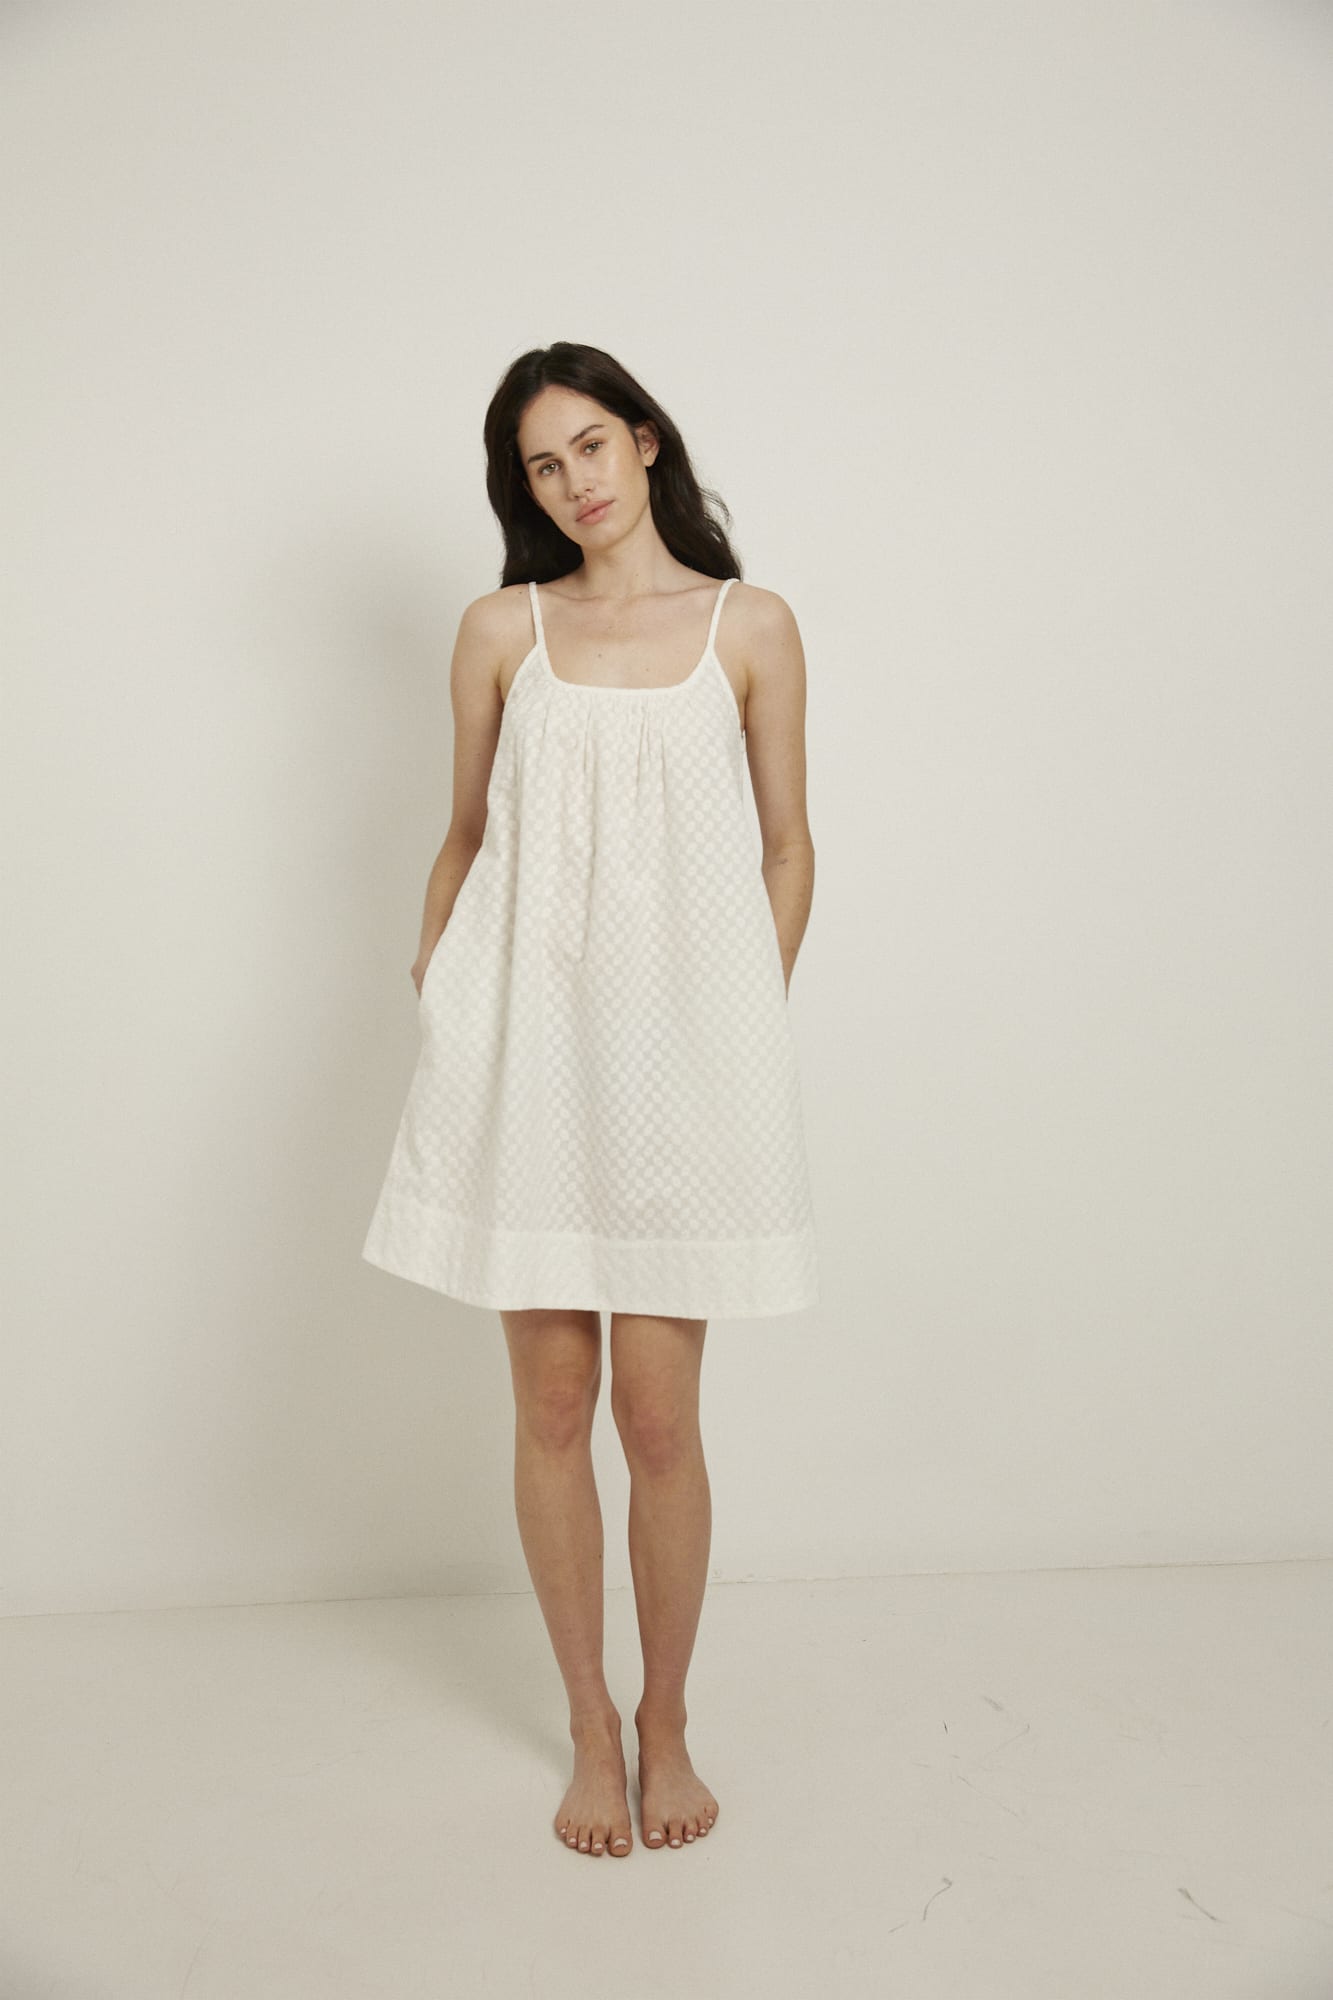 This knee length women’s nightdress dress features a scoop neck, adjustable spaghetti straps and side pockets. Finished with a wide hem, French seams, it is made from 100% organic cotton, in white, and features delicate all over embroidery.